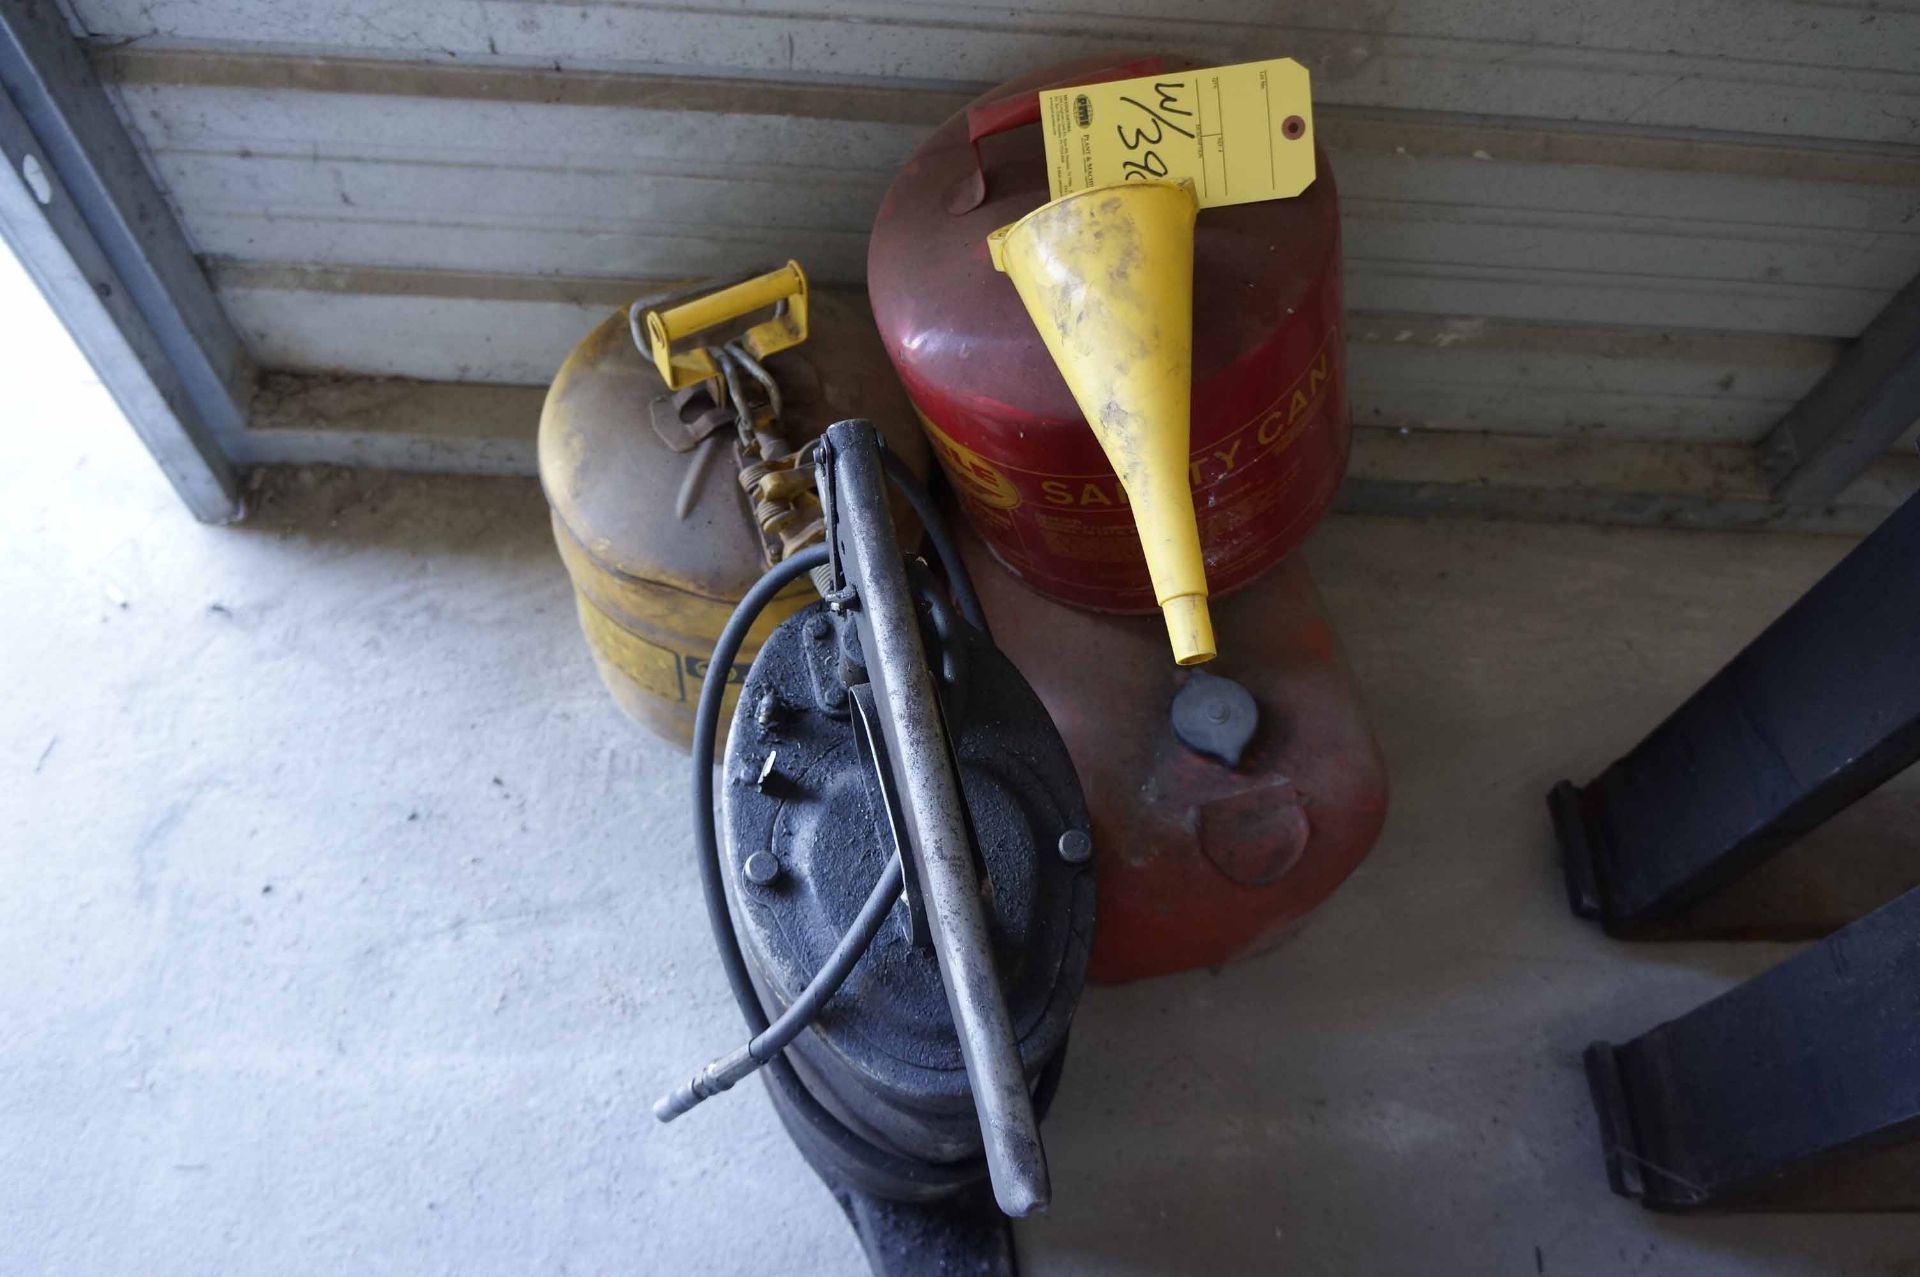 LOT CONSISTING OF: Whitco diesel pwrd. steam cleaner, Craftsman Lawn Edger & gas cans - Image 5 of 5